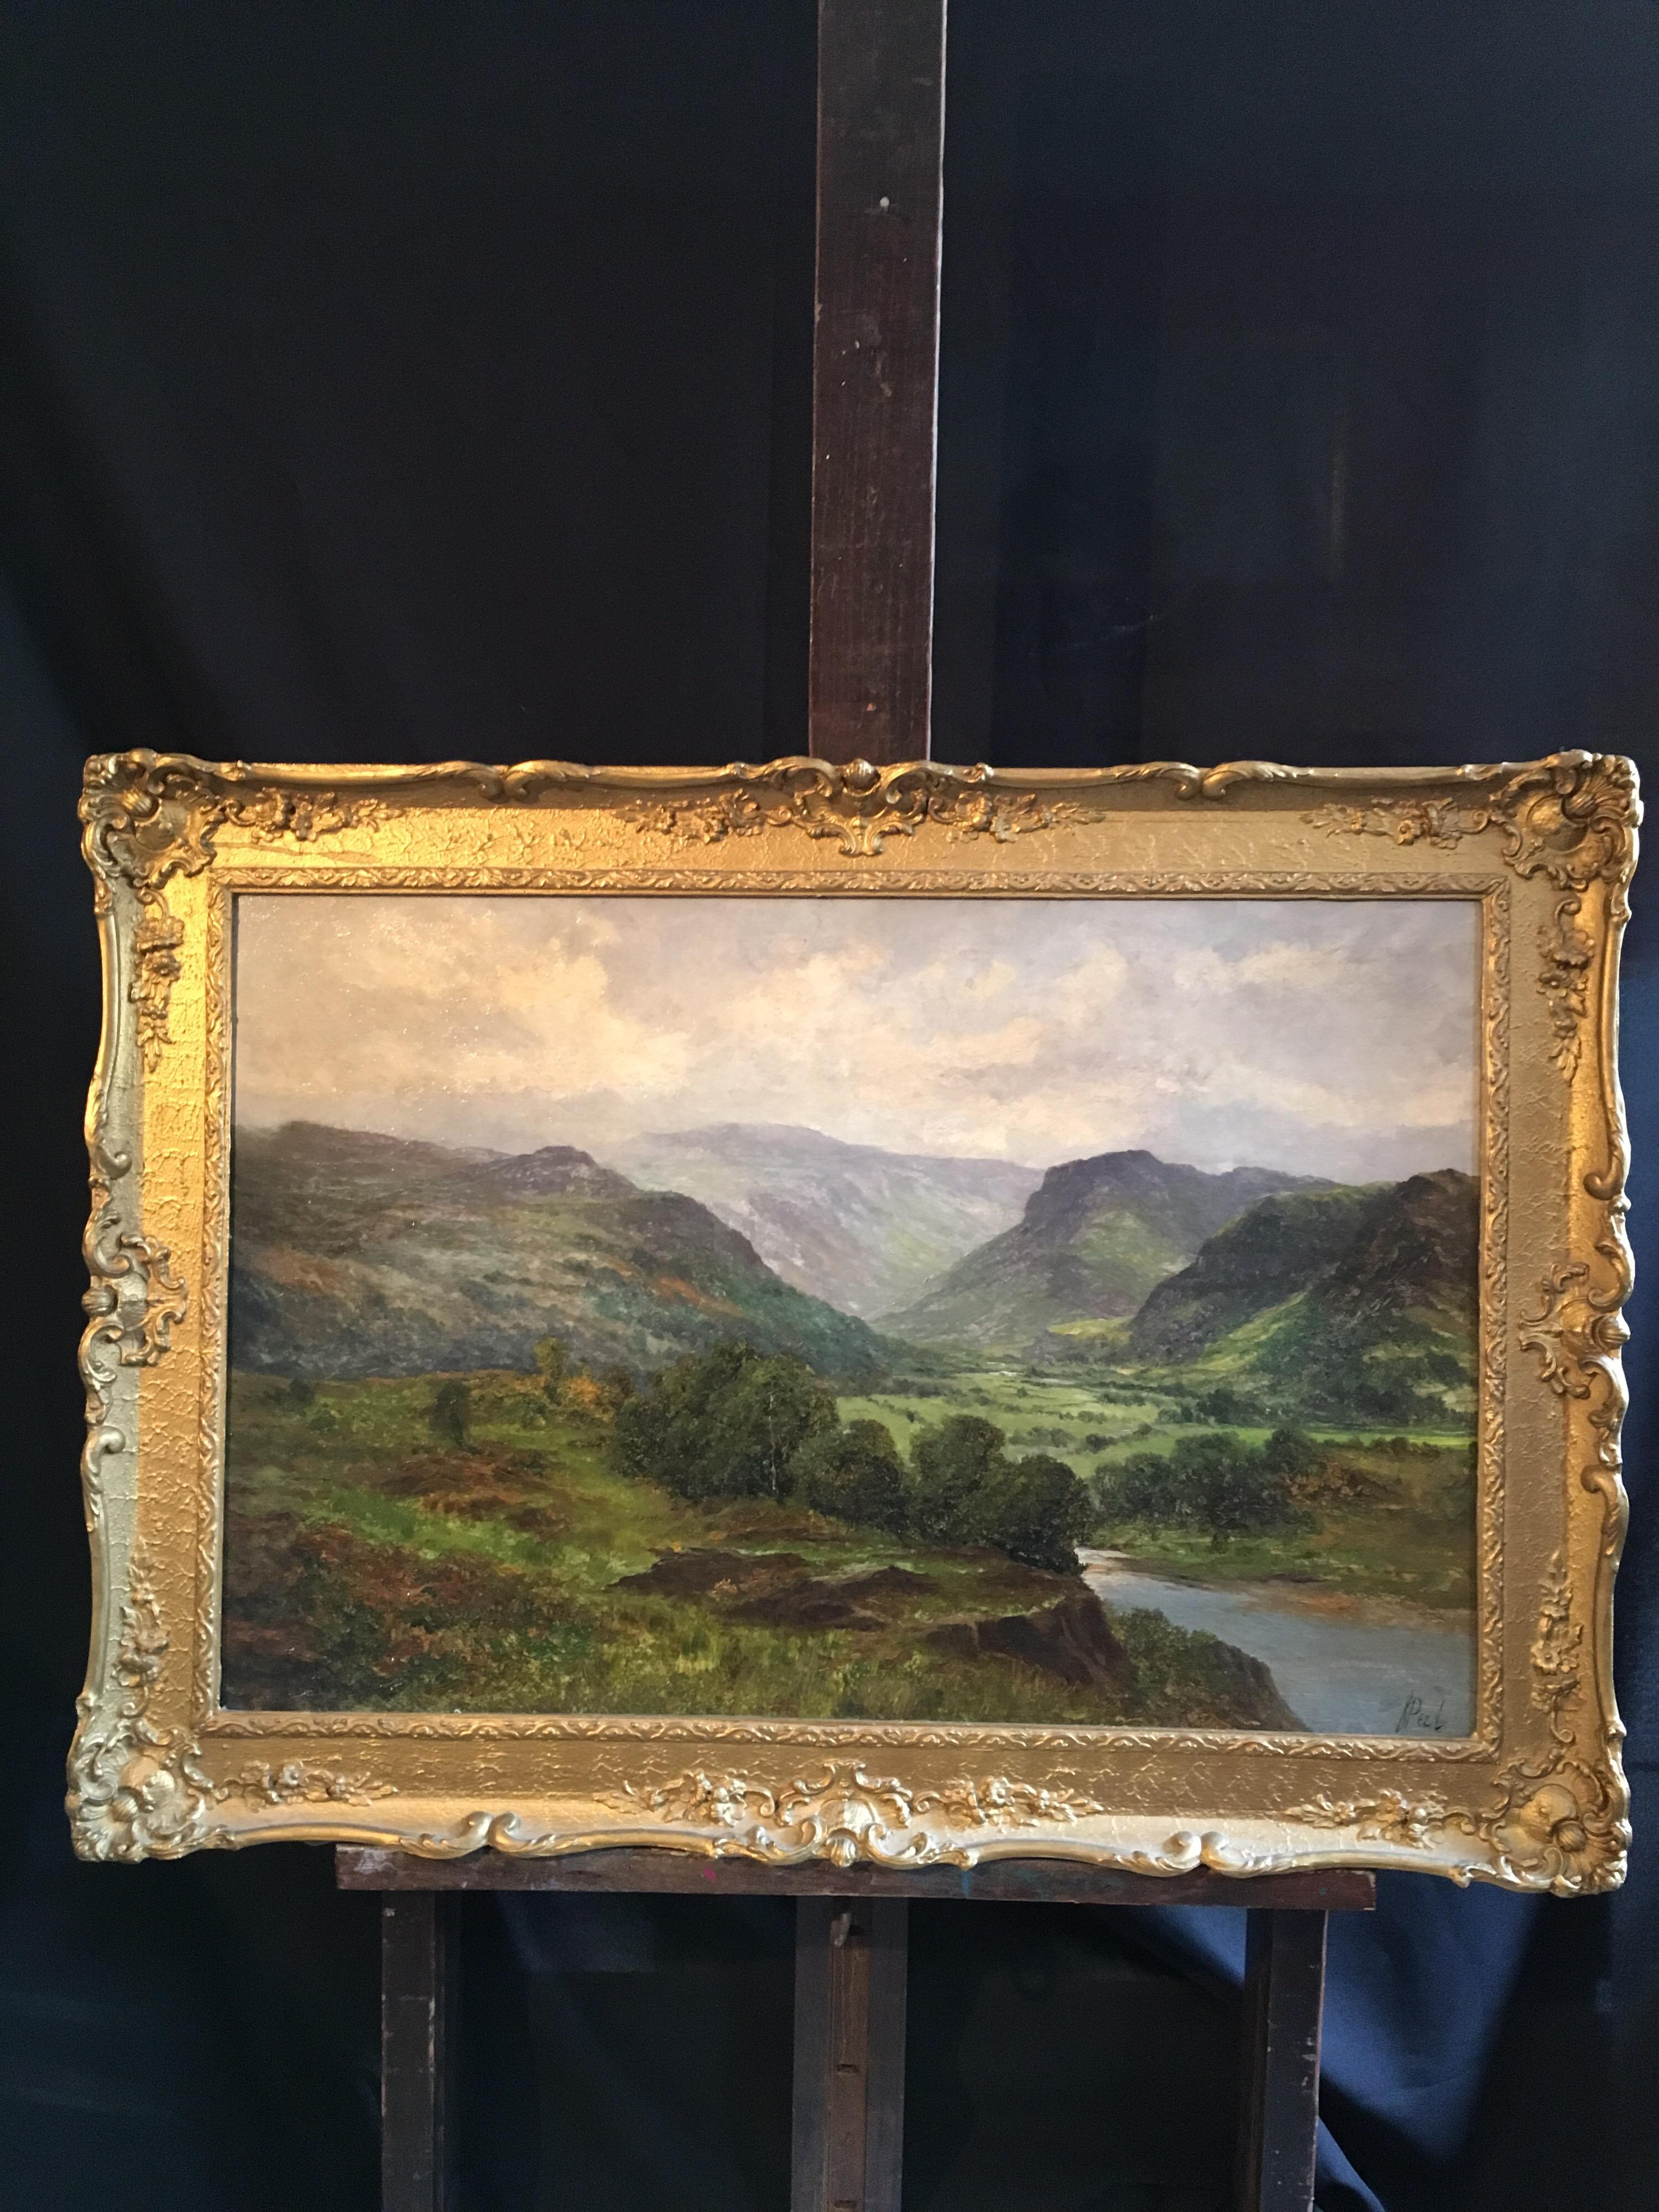 Cloudy Mountains, Victorian Landscape, Green, Original Oil Painting, Signed
By British artist Peel, late 19th century
Signed by the artist on the lower right hand corner
Oil painting on canvas, framed
Framed size: 25 x 35 inches

Majestic scene of